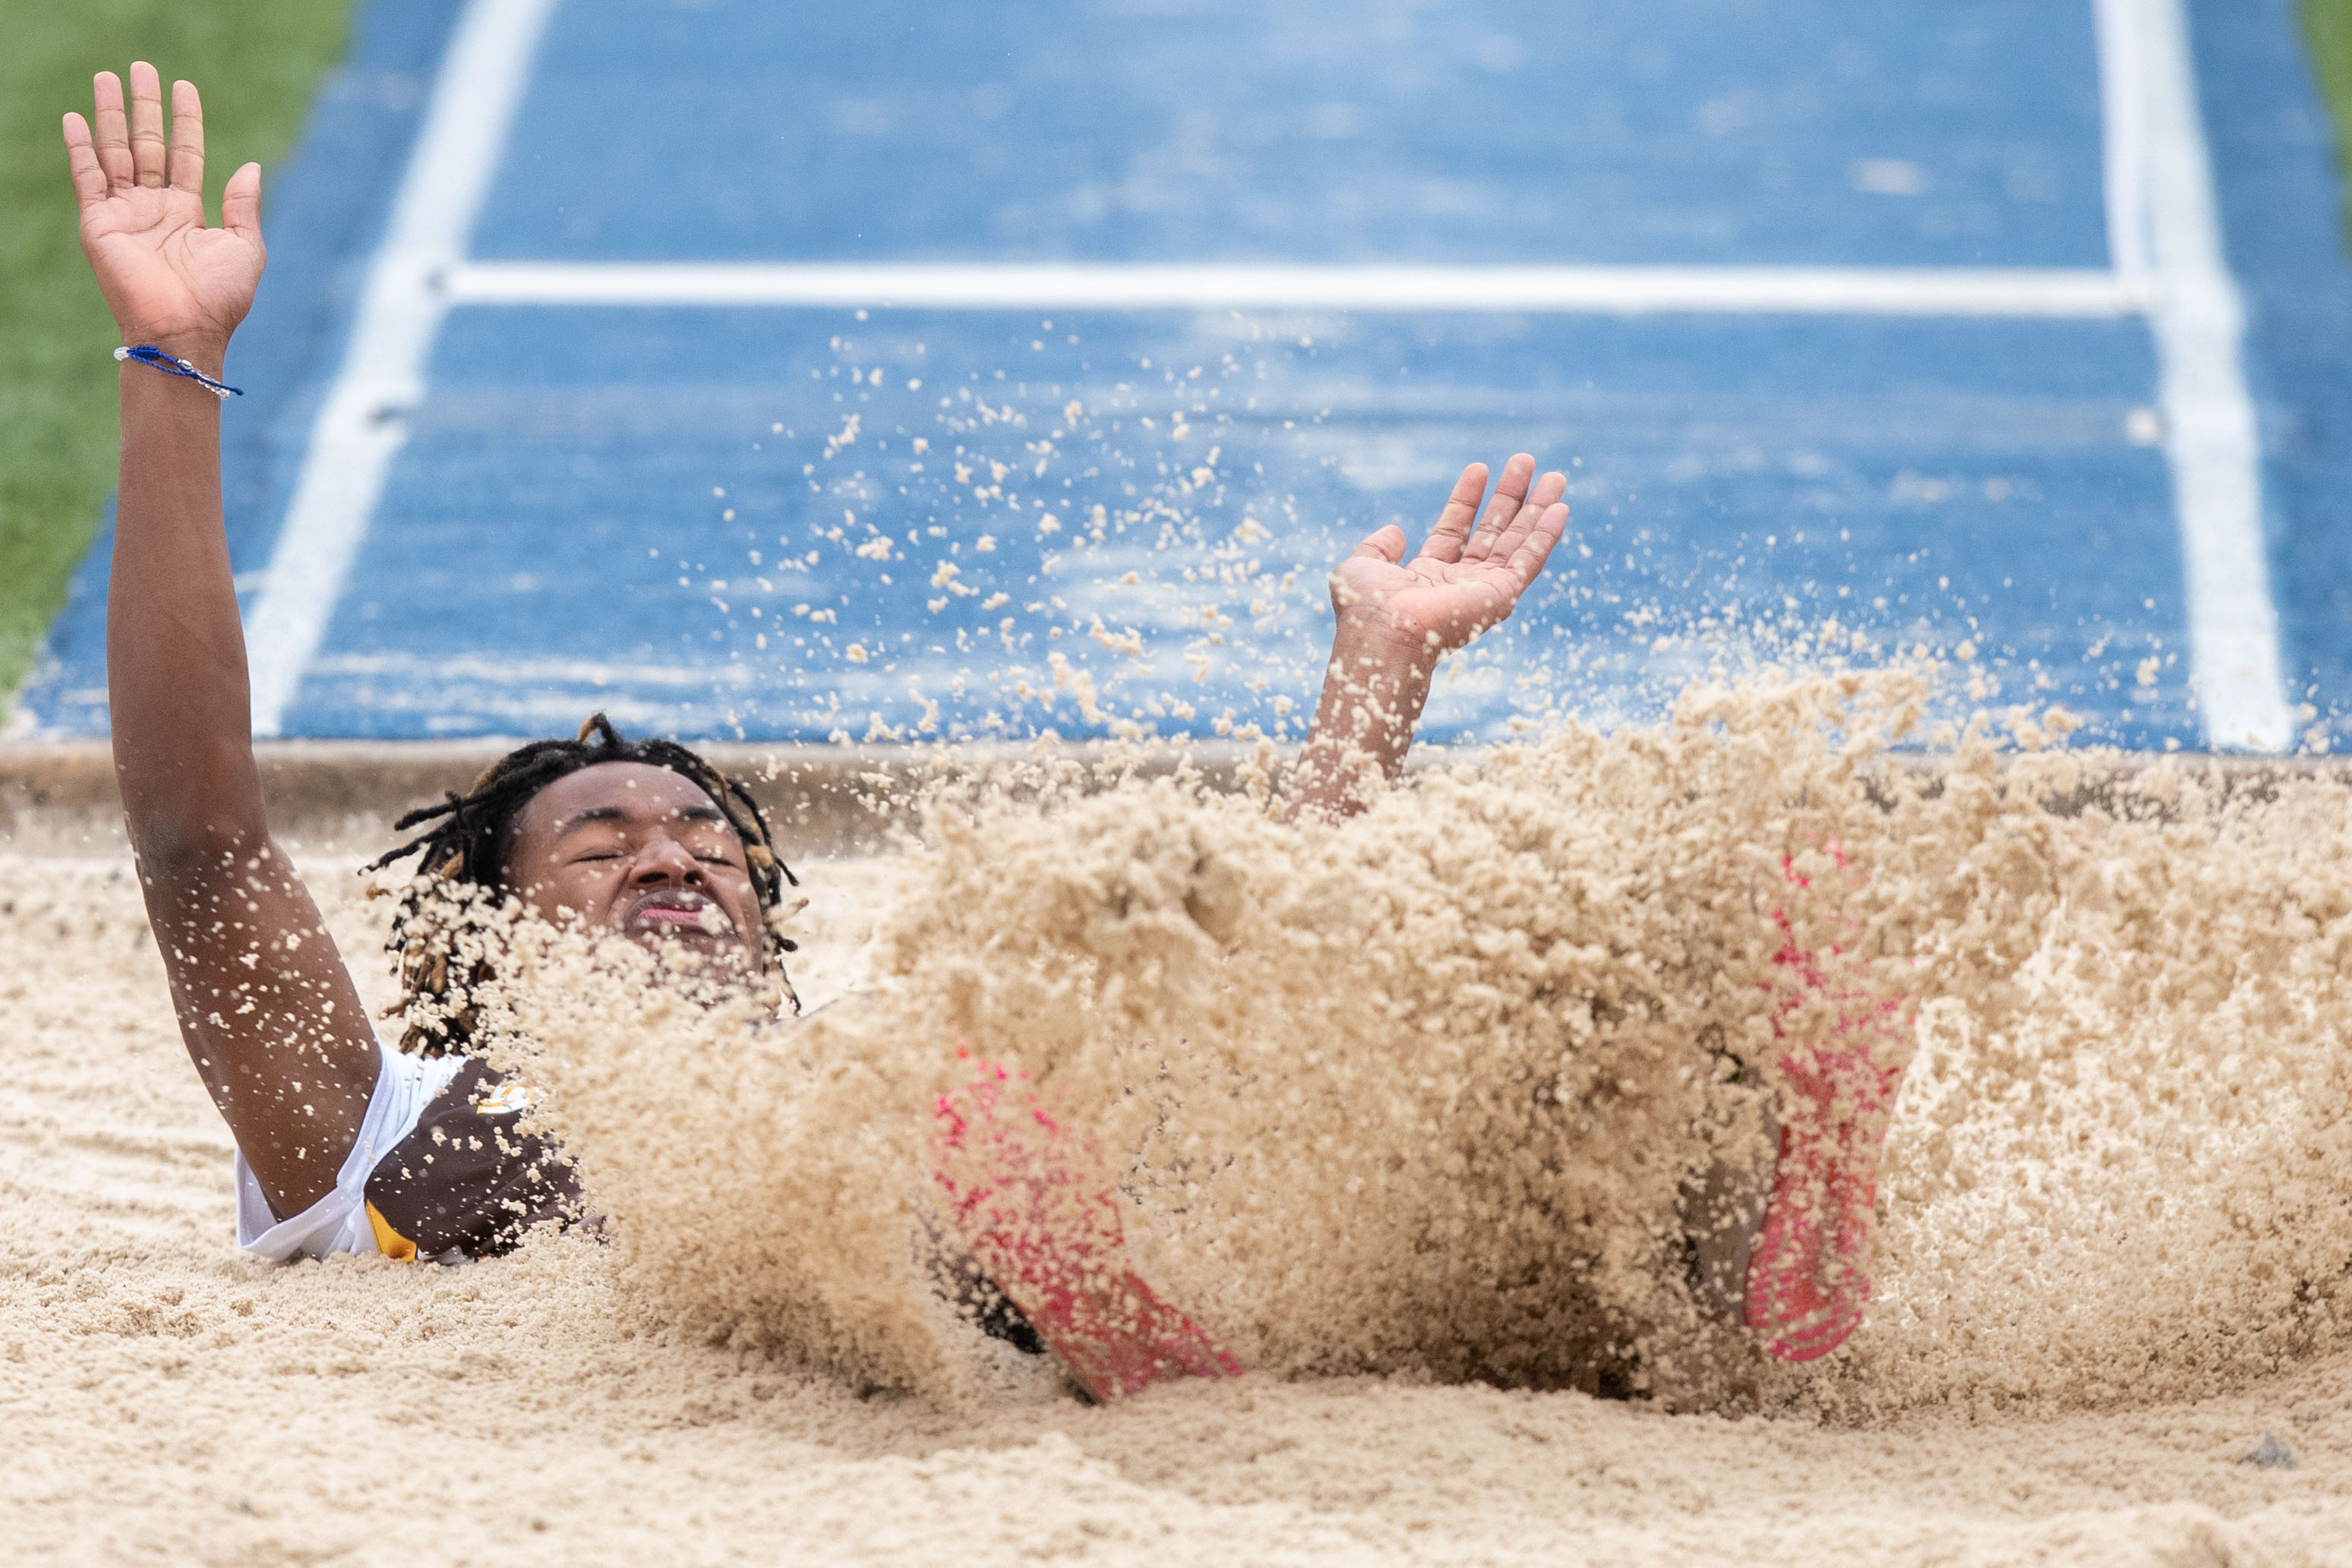 Michael Blidi, Milton Hershey, lands in the triple jump pit at the 2023 Tim Cook Memorial Invitational track & field meet at Chambersburg, Pa., Mar. 25, 2023.Mark Pynes | pennlive.com